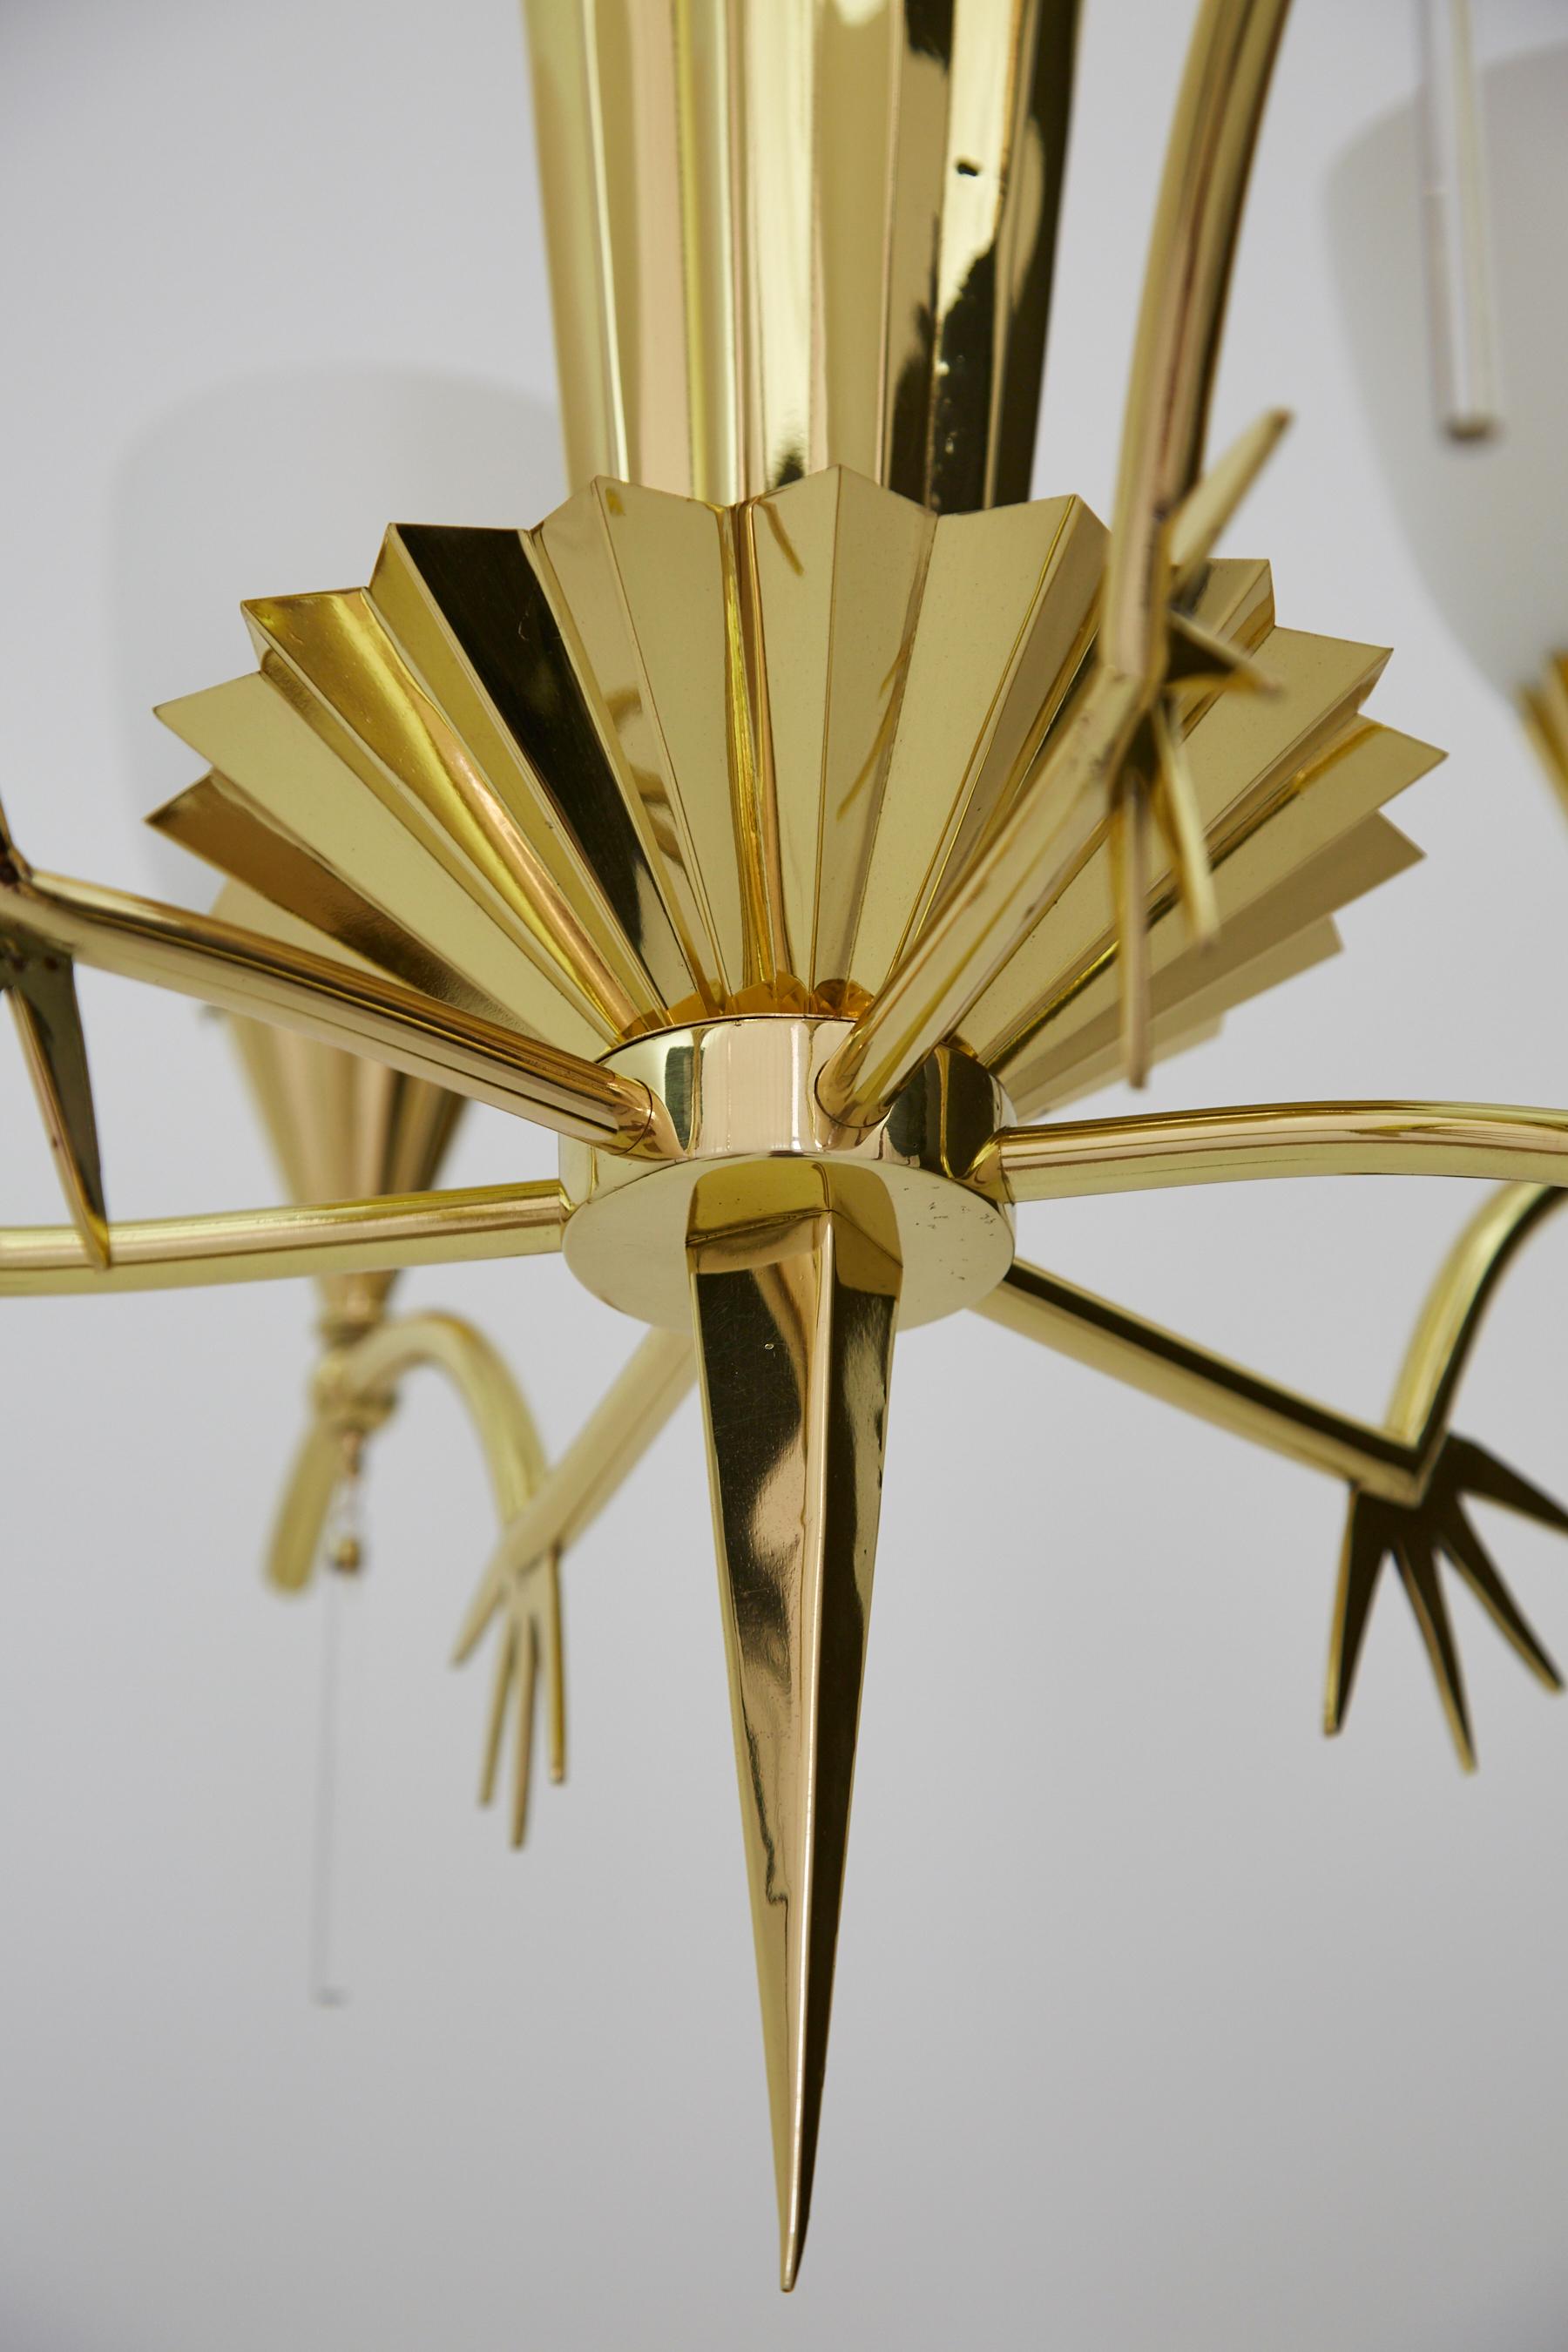 Six-Arm Italian Brass Chandelier with Decorative Spikes, 1940s For Sale 7